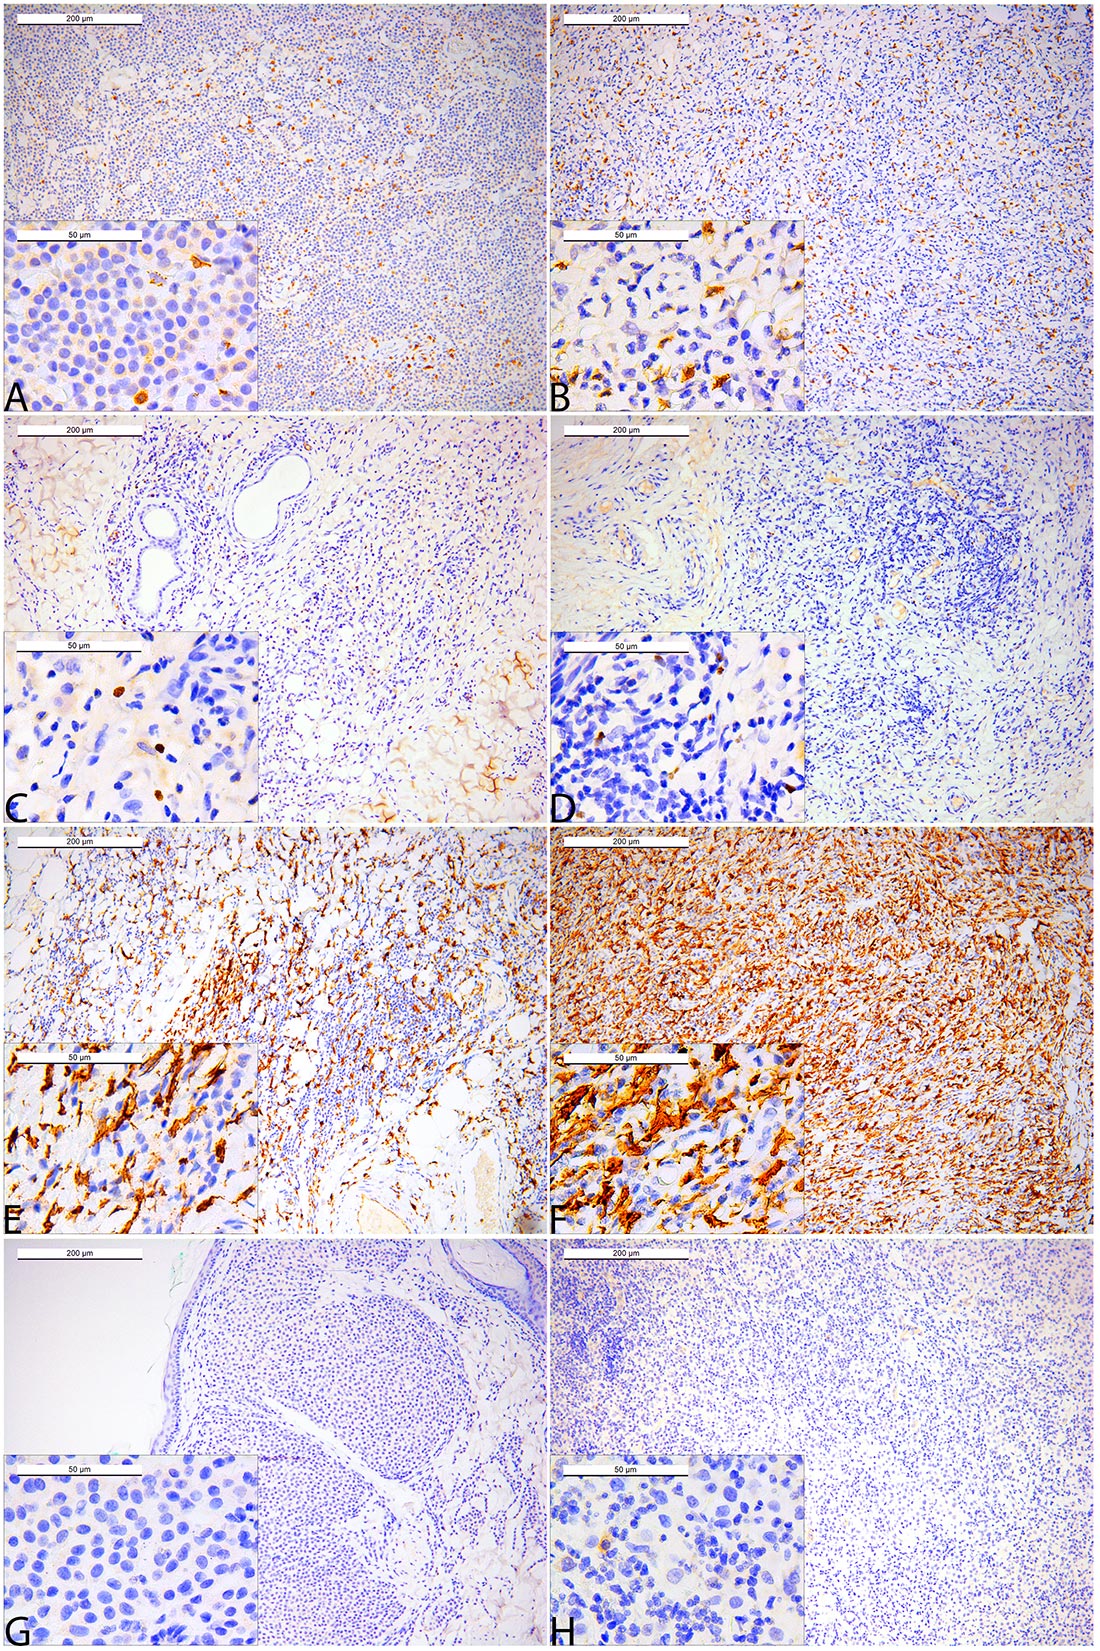 Immune cell infiltration of canine mast cell tumors